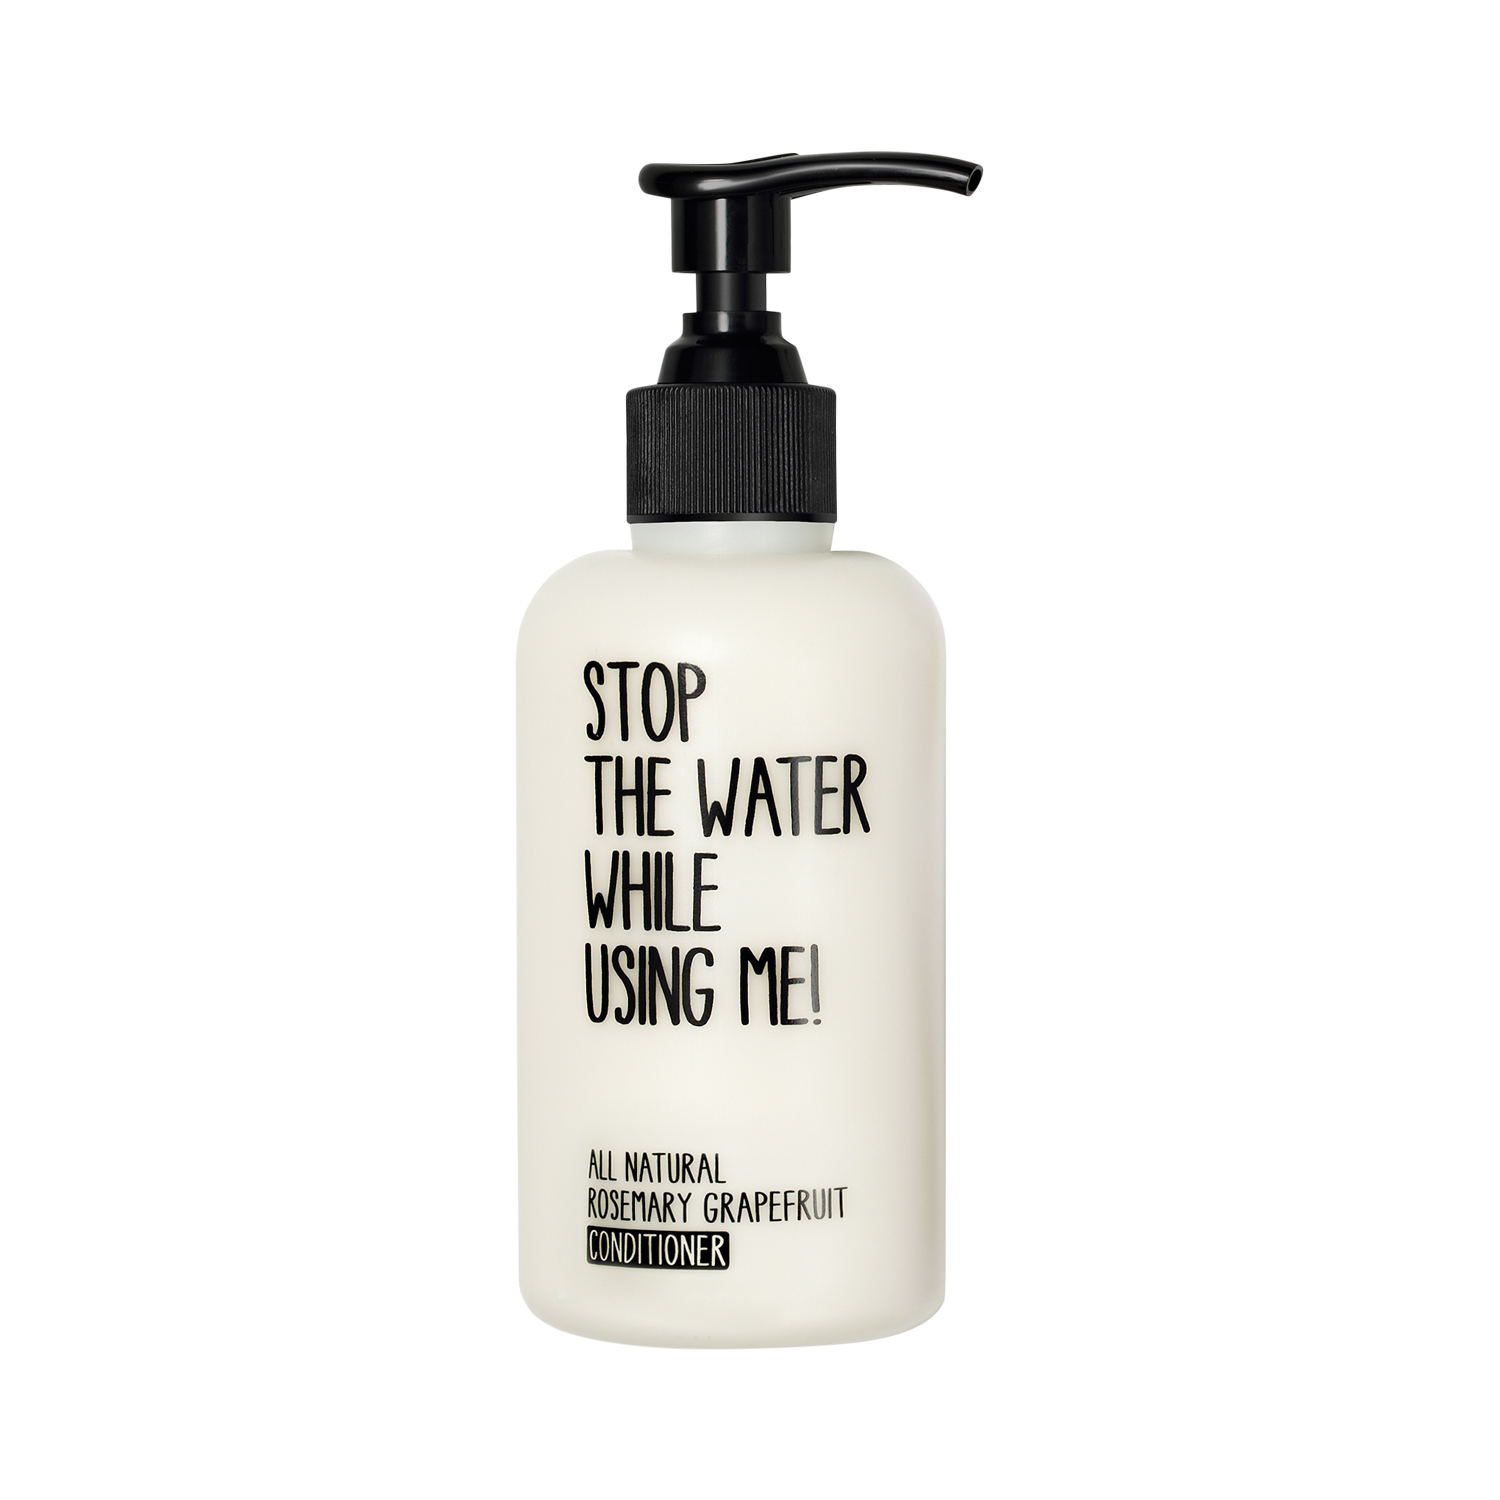 Stop The Water While Using Me! - All Natural Rosmarin Grapefruit Conditioner